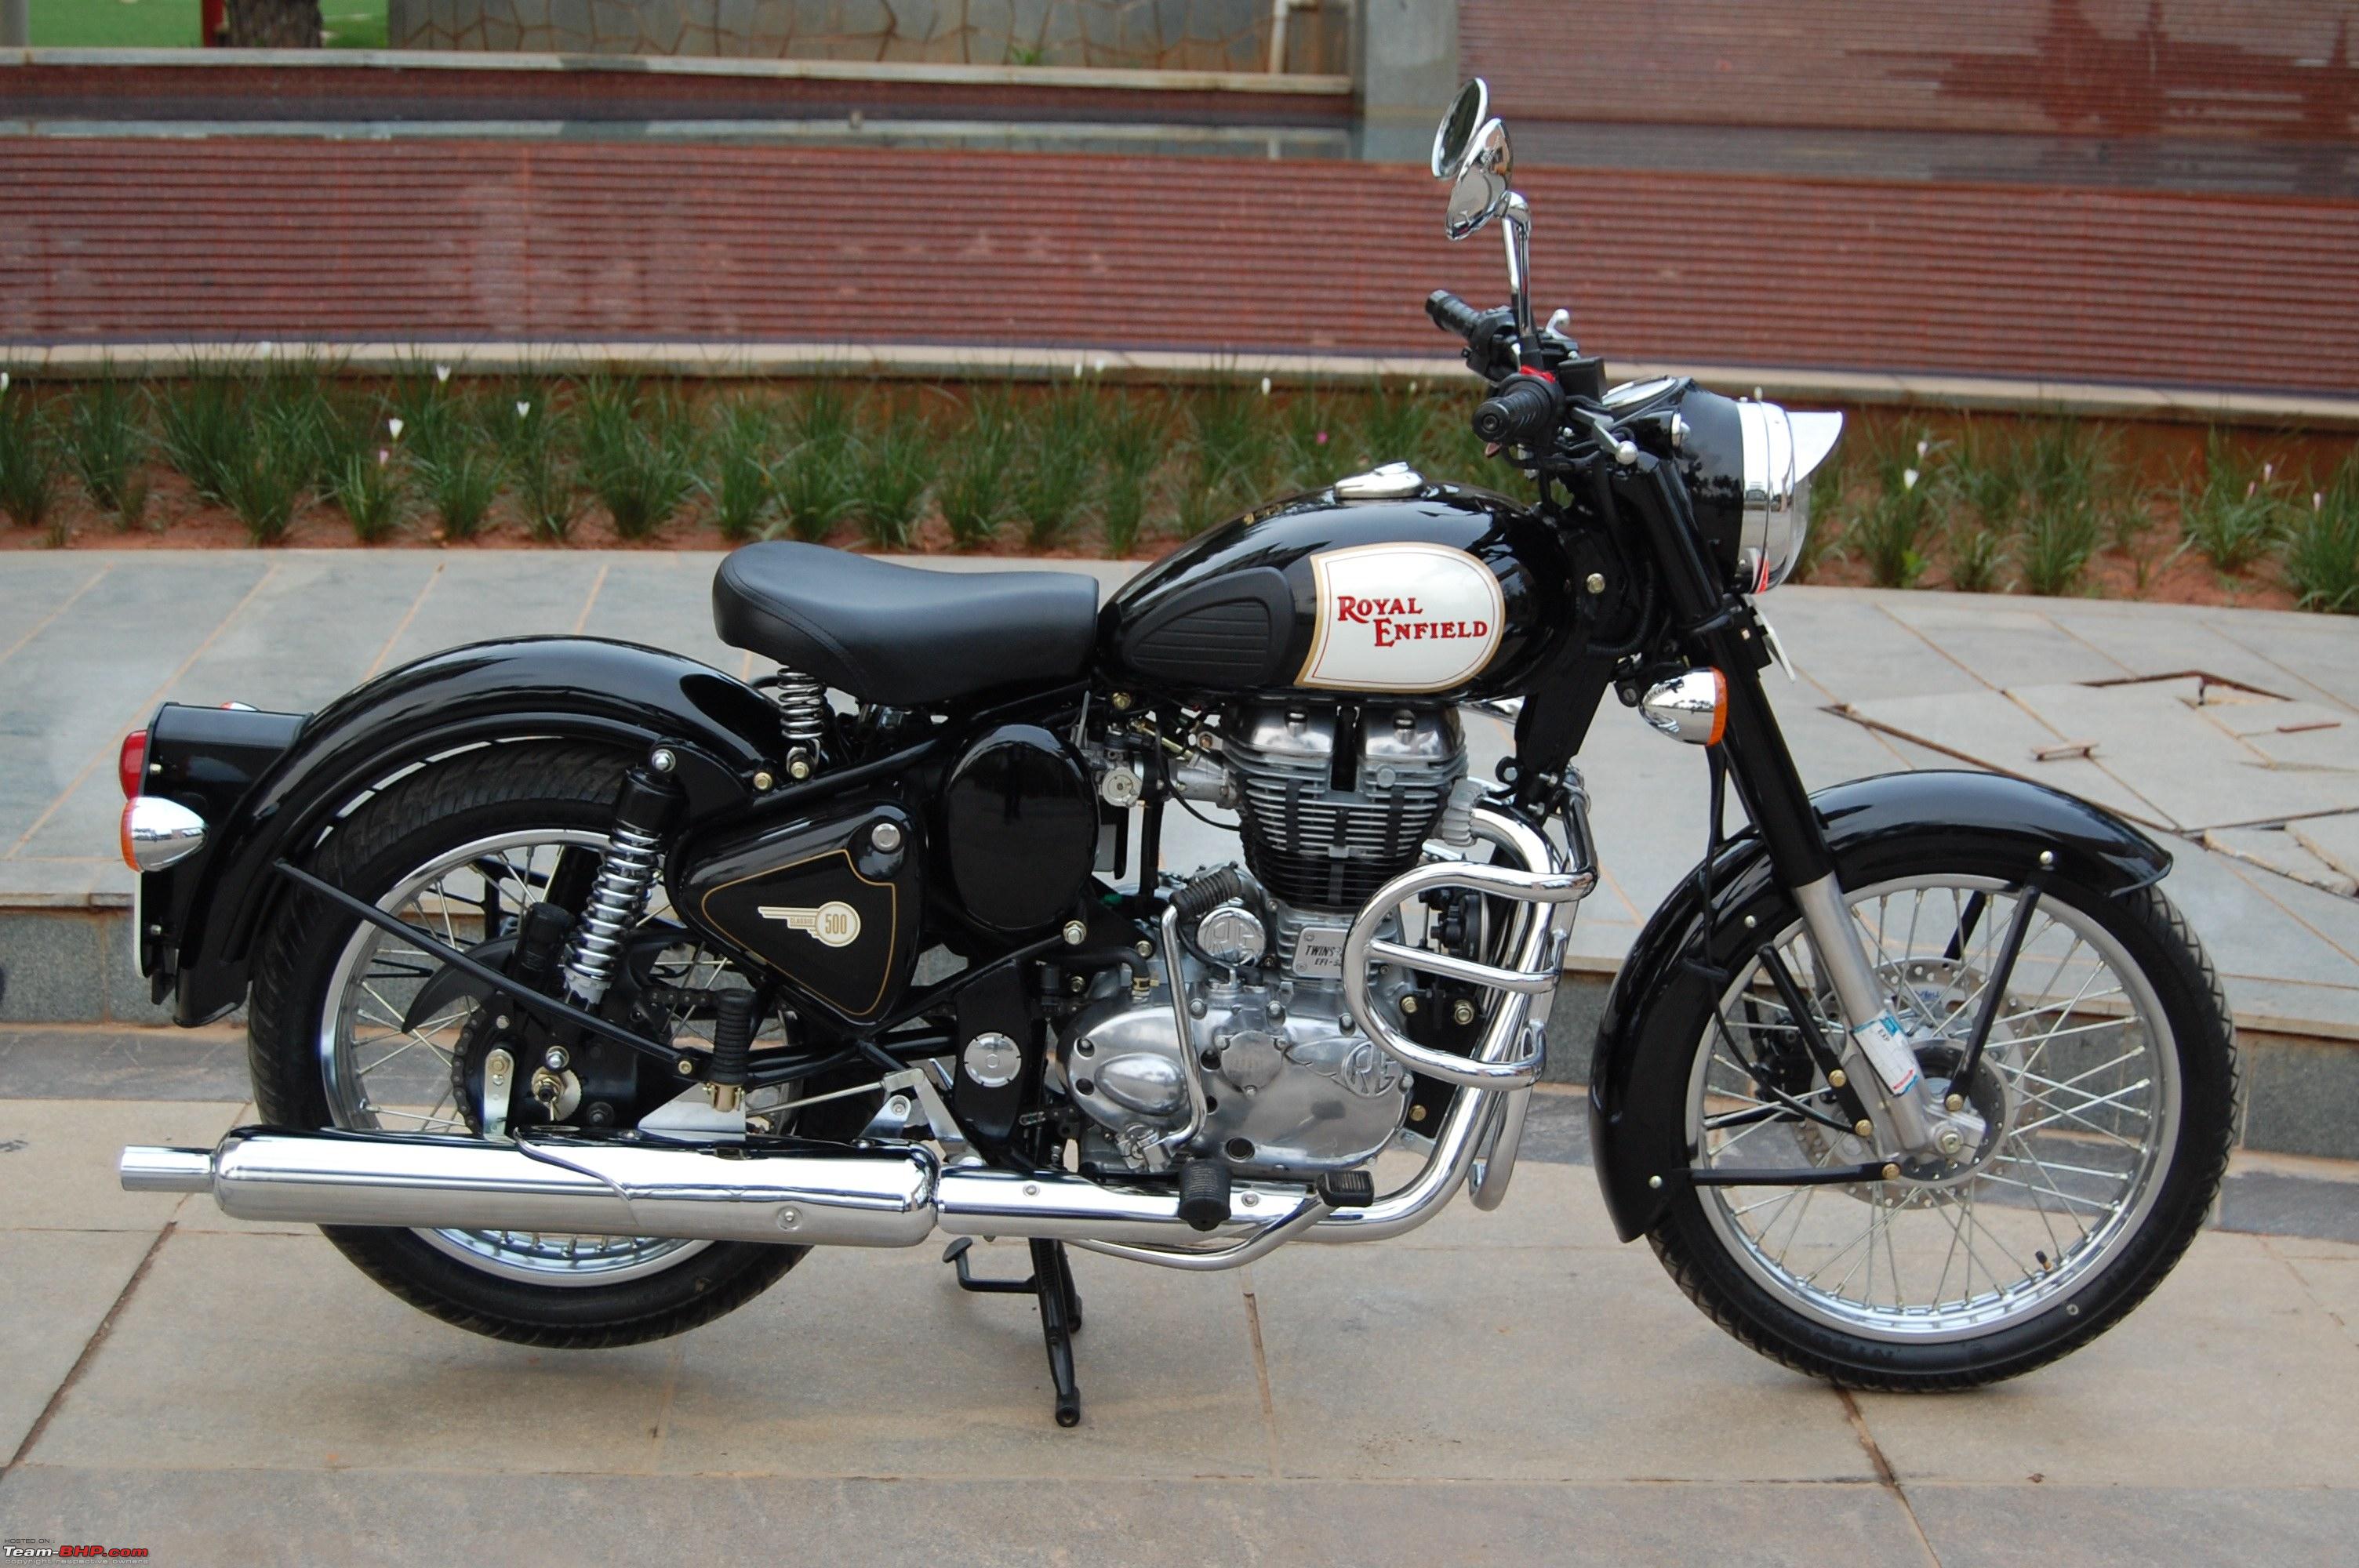 The Royal Enfield 500 Classic thread! - Page 133 - Team-BHP